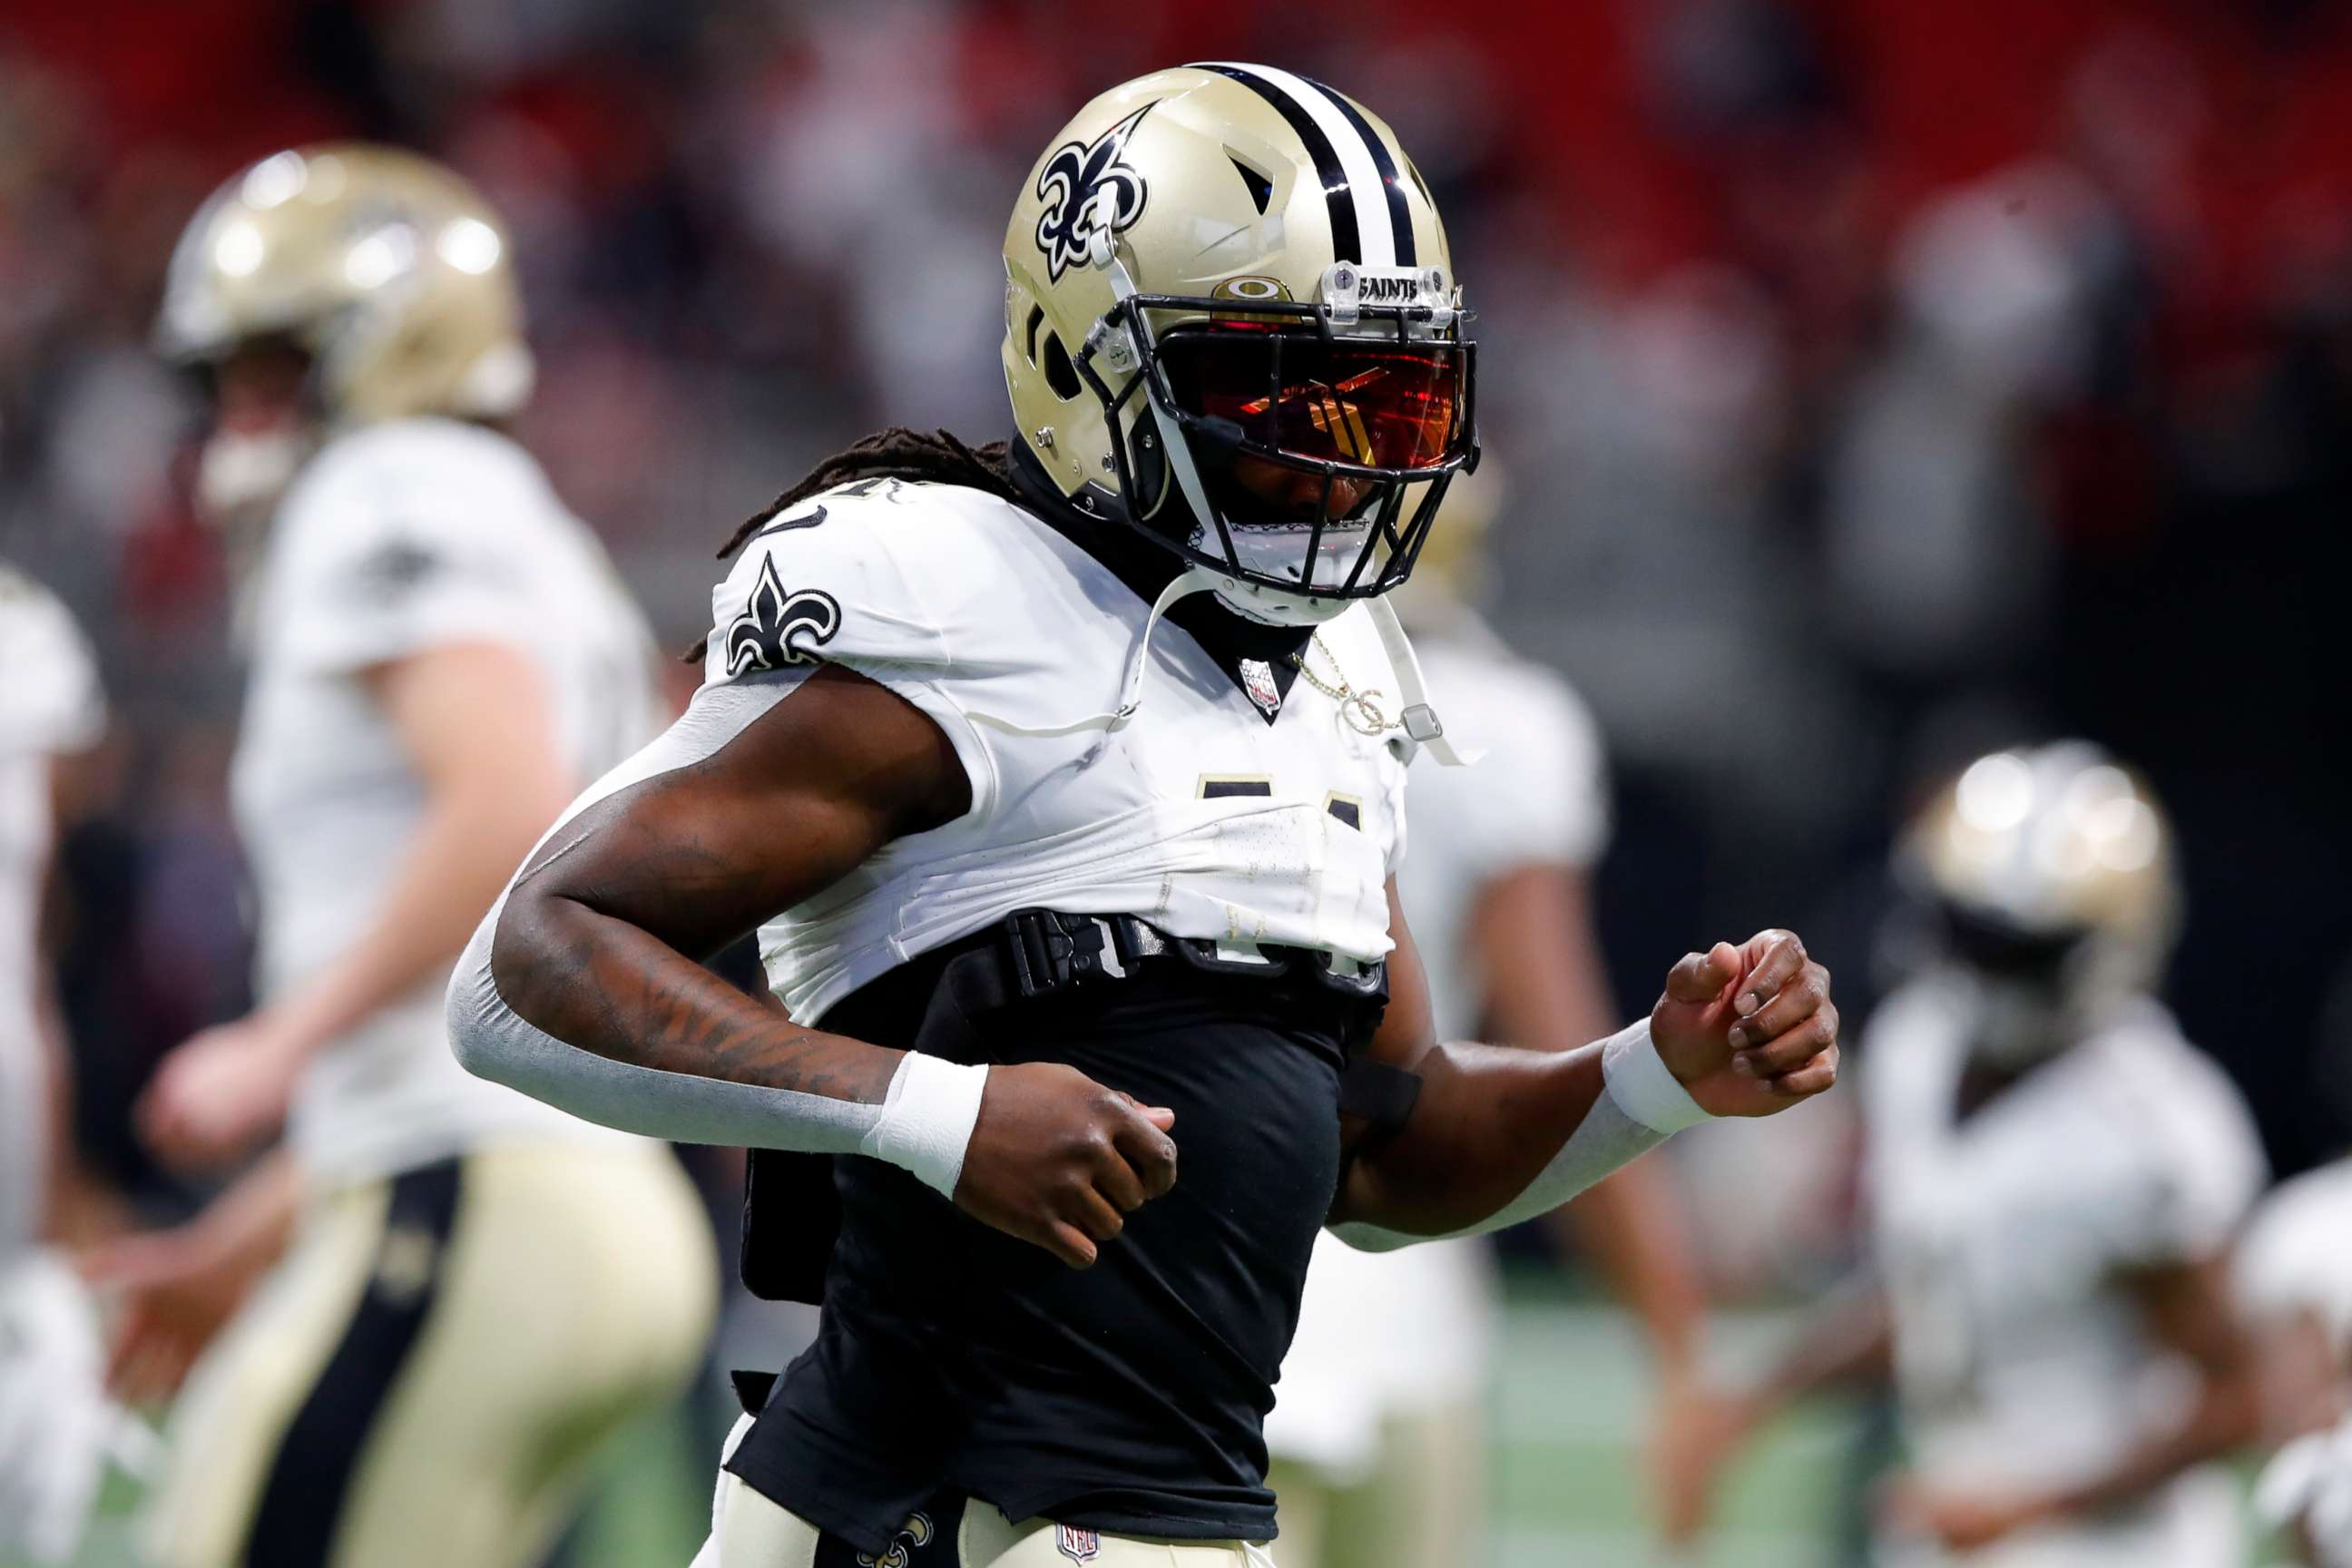 PHOTO: ATLANTA, GEORGIA - JANUARY 09: Alvin Kamara #41 of the New Orleans Saints warms up before the game against the Atlanta Falcons at Mercedes-Benz Stadium on January 09, 2022 in Atlanta, Georgia. (Photo by Todd Kirkland/Getty Images)